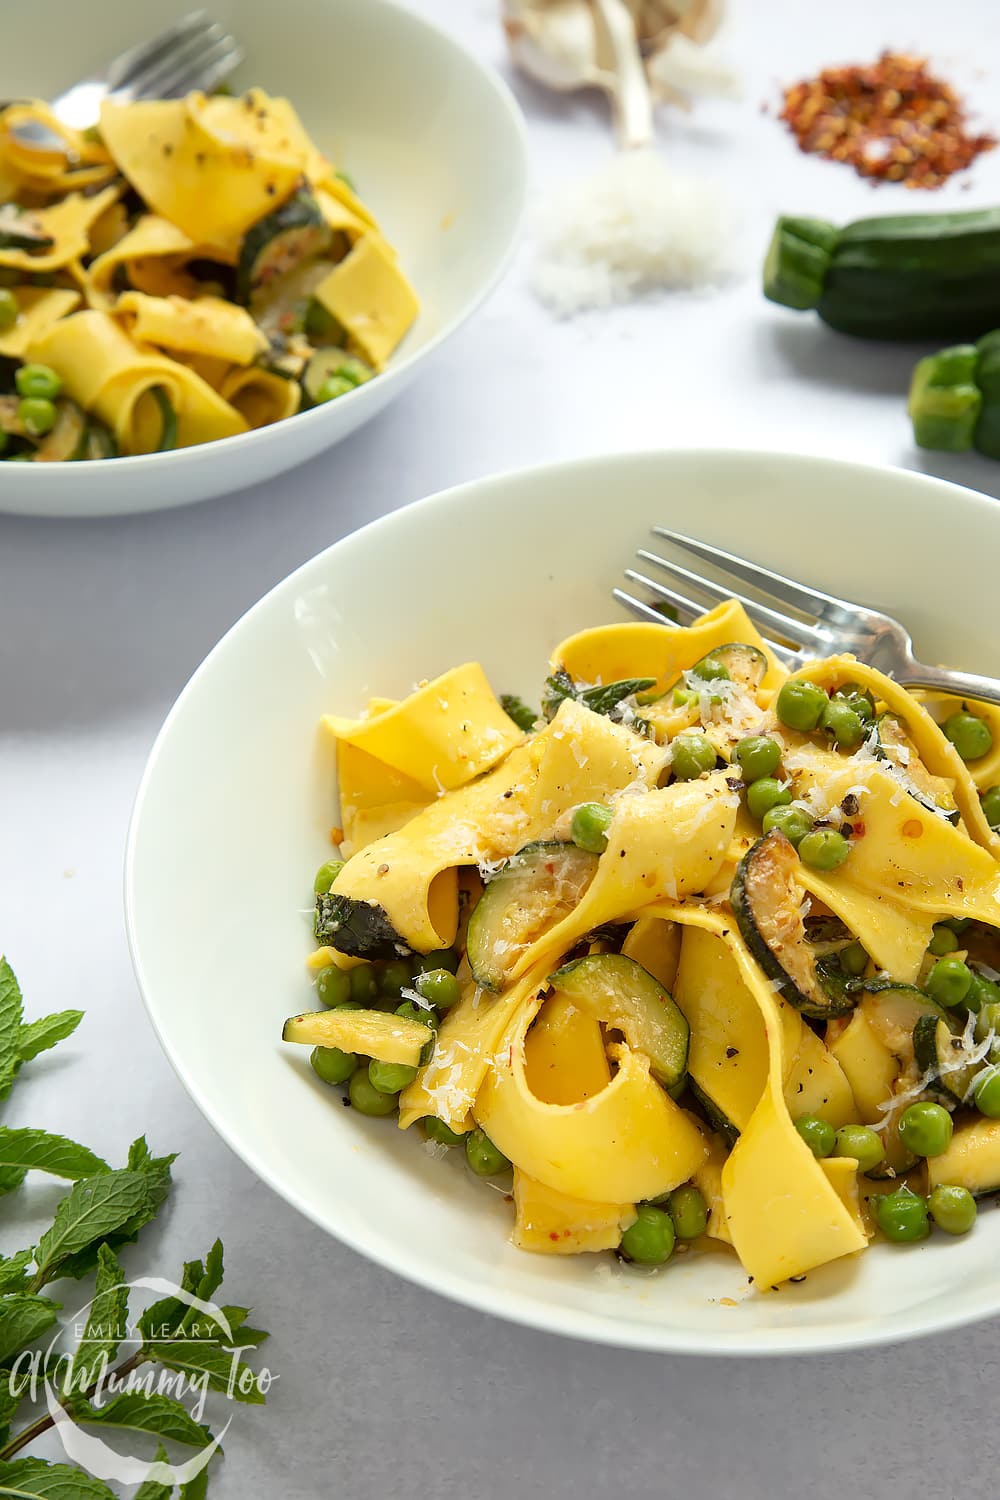 Jamie Oliver's courgette and pea pasta served into two bowls.